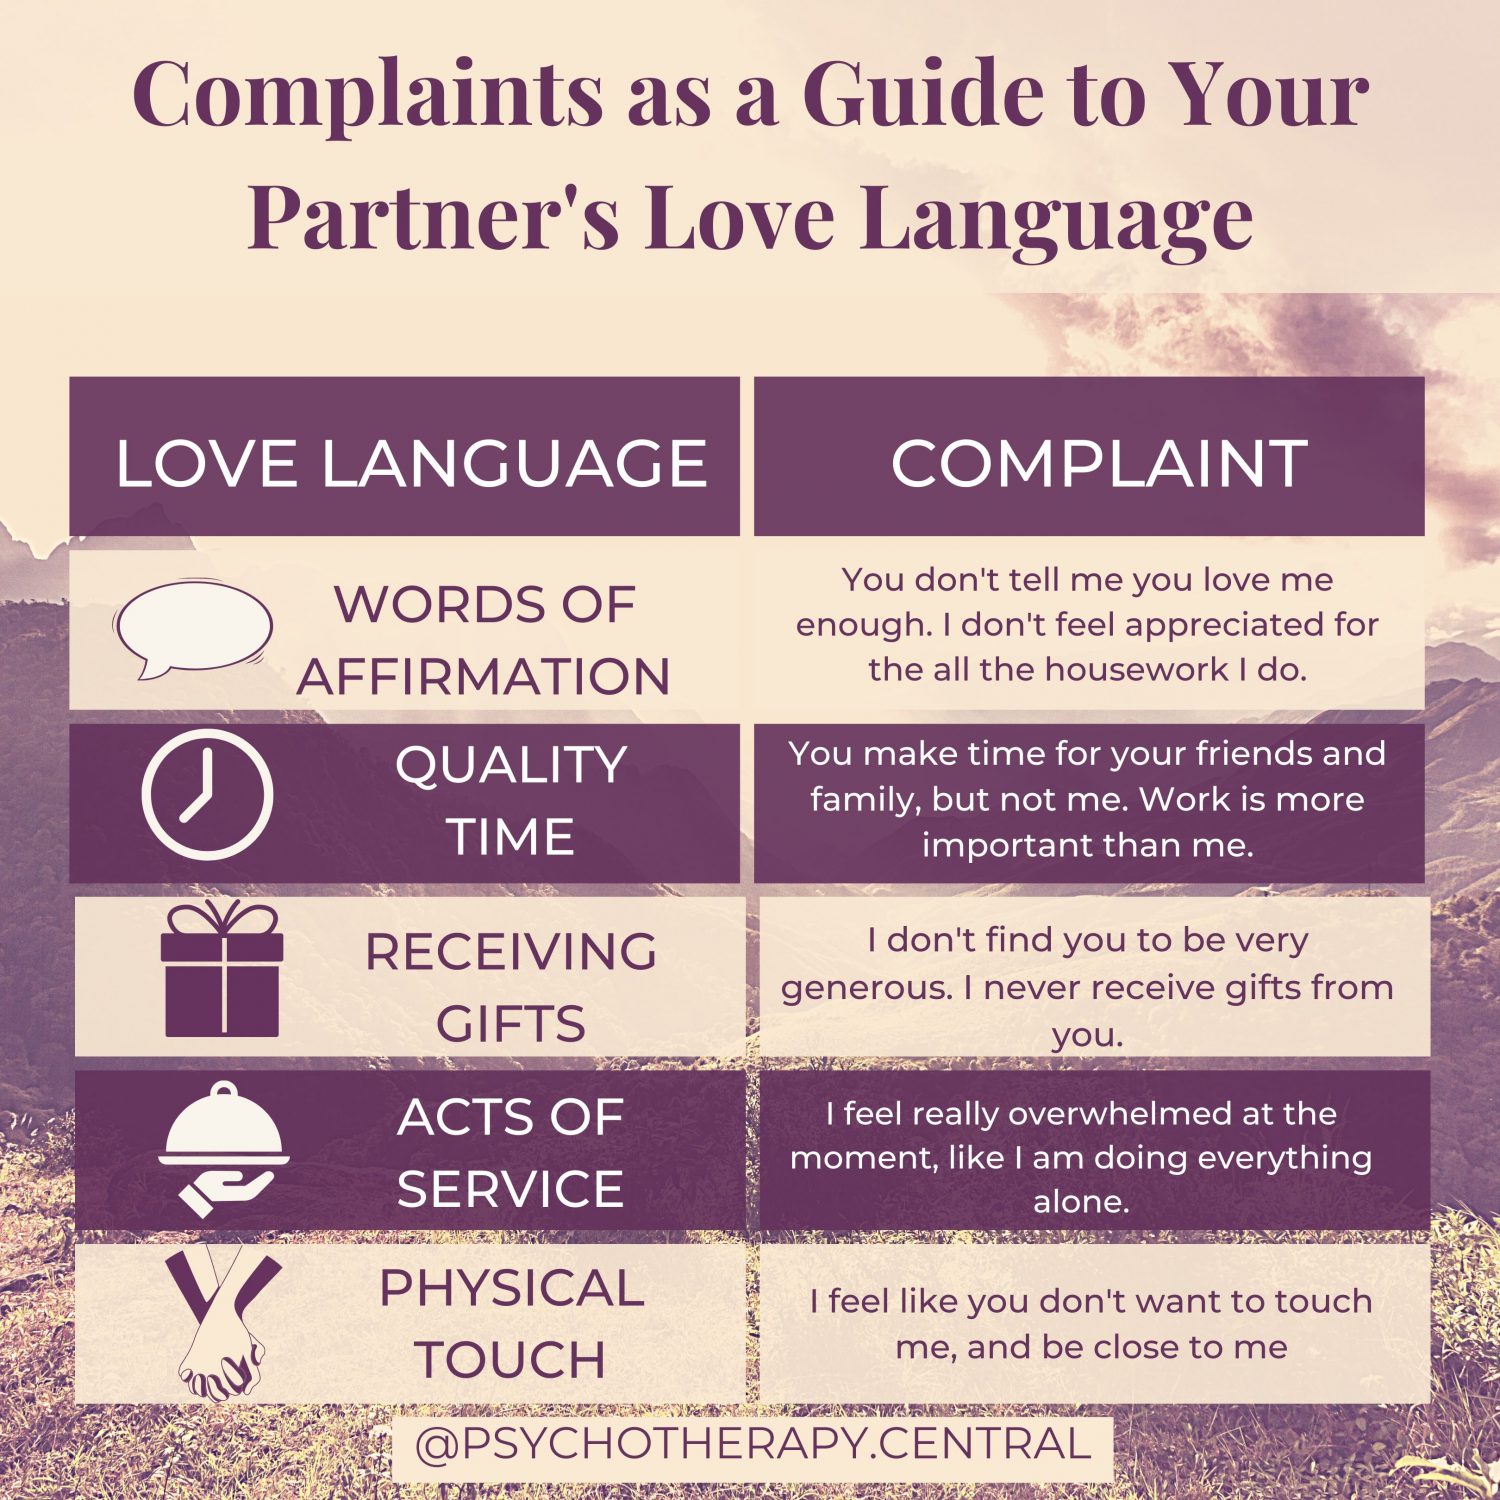 Complaints as a Guide to Your Partner's Love Language